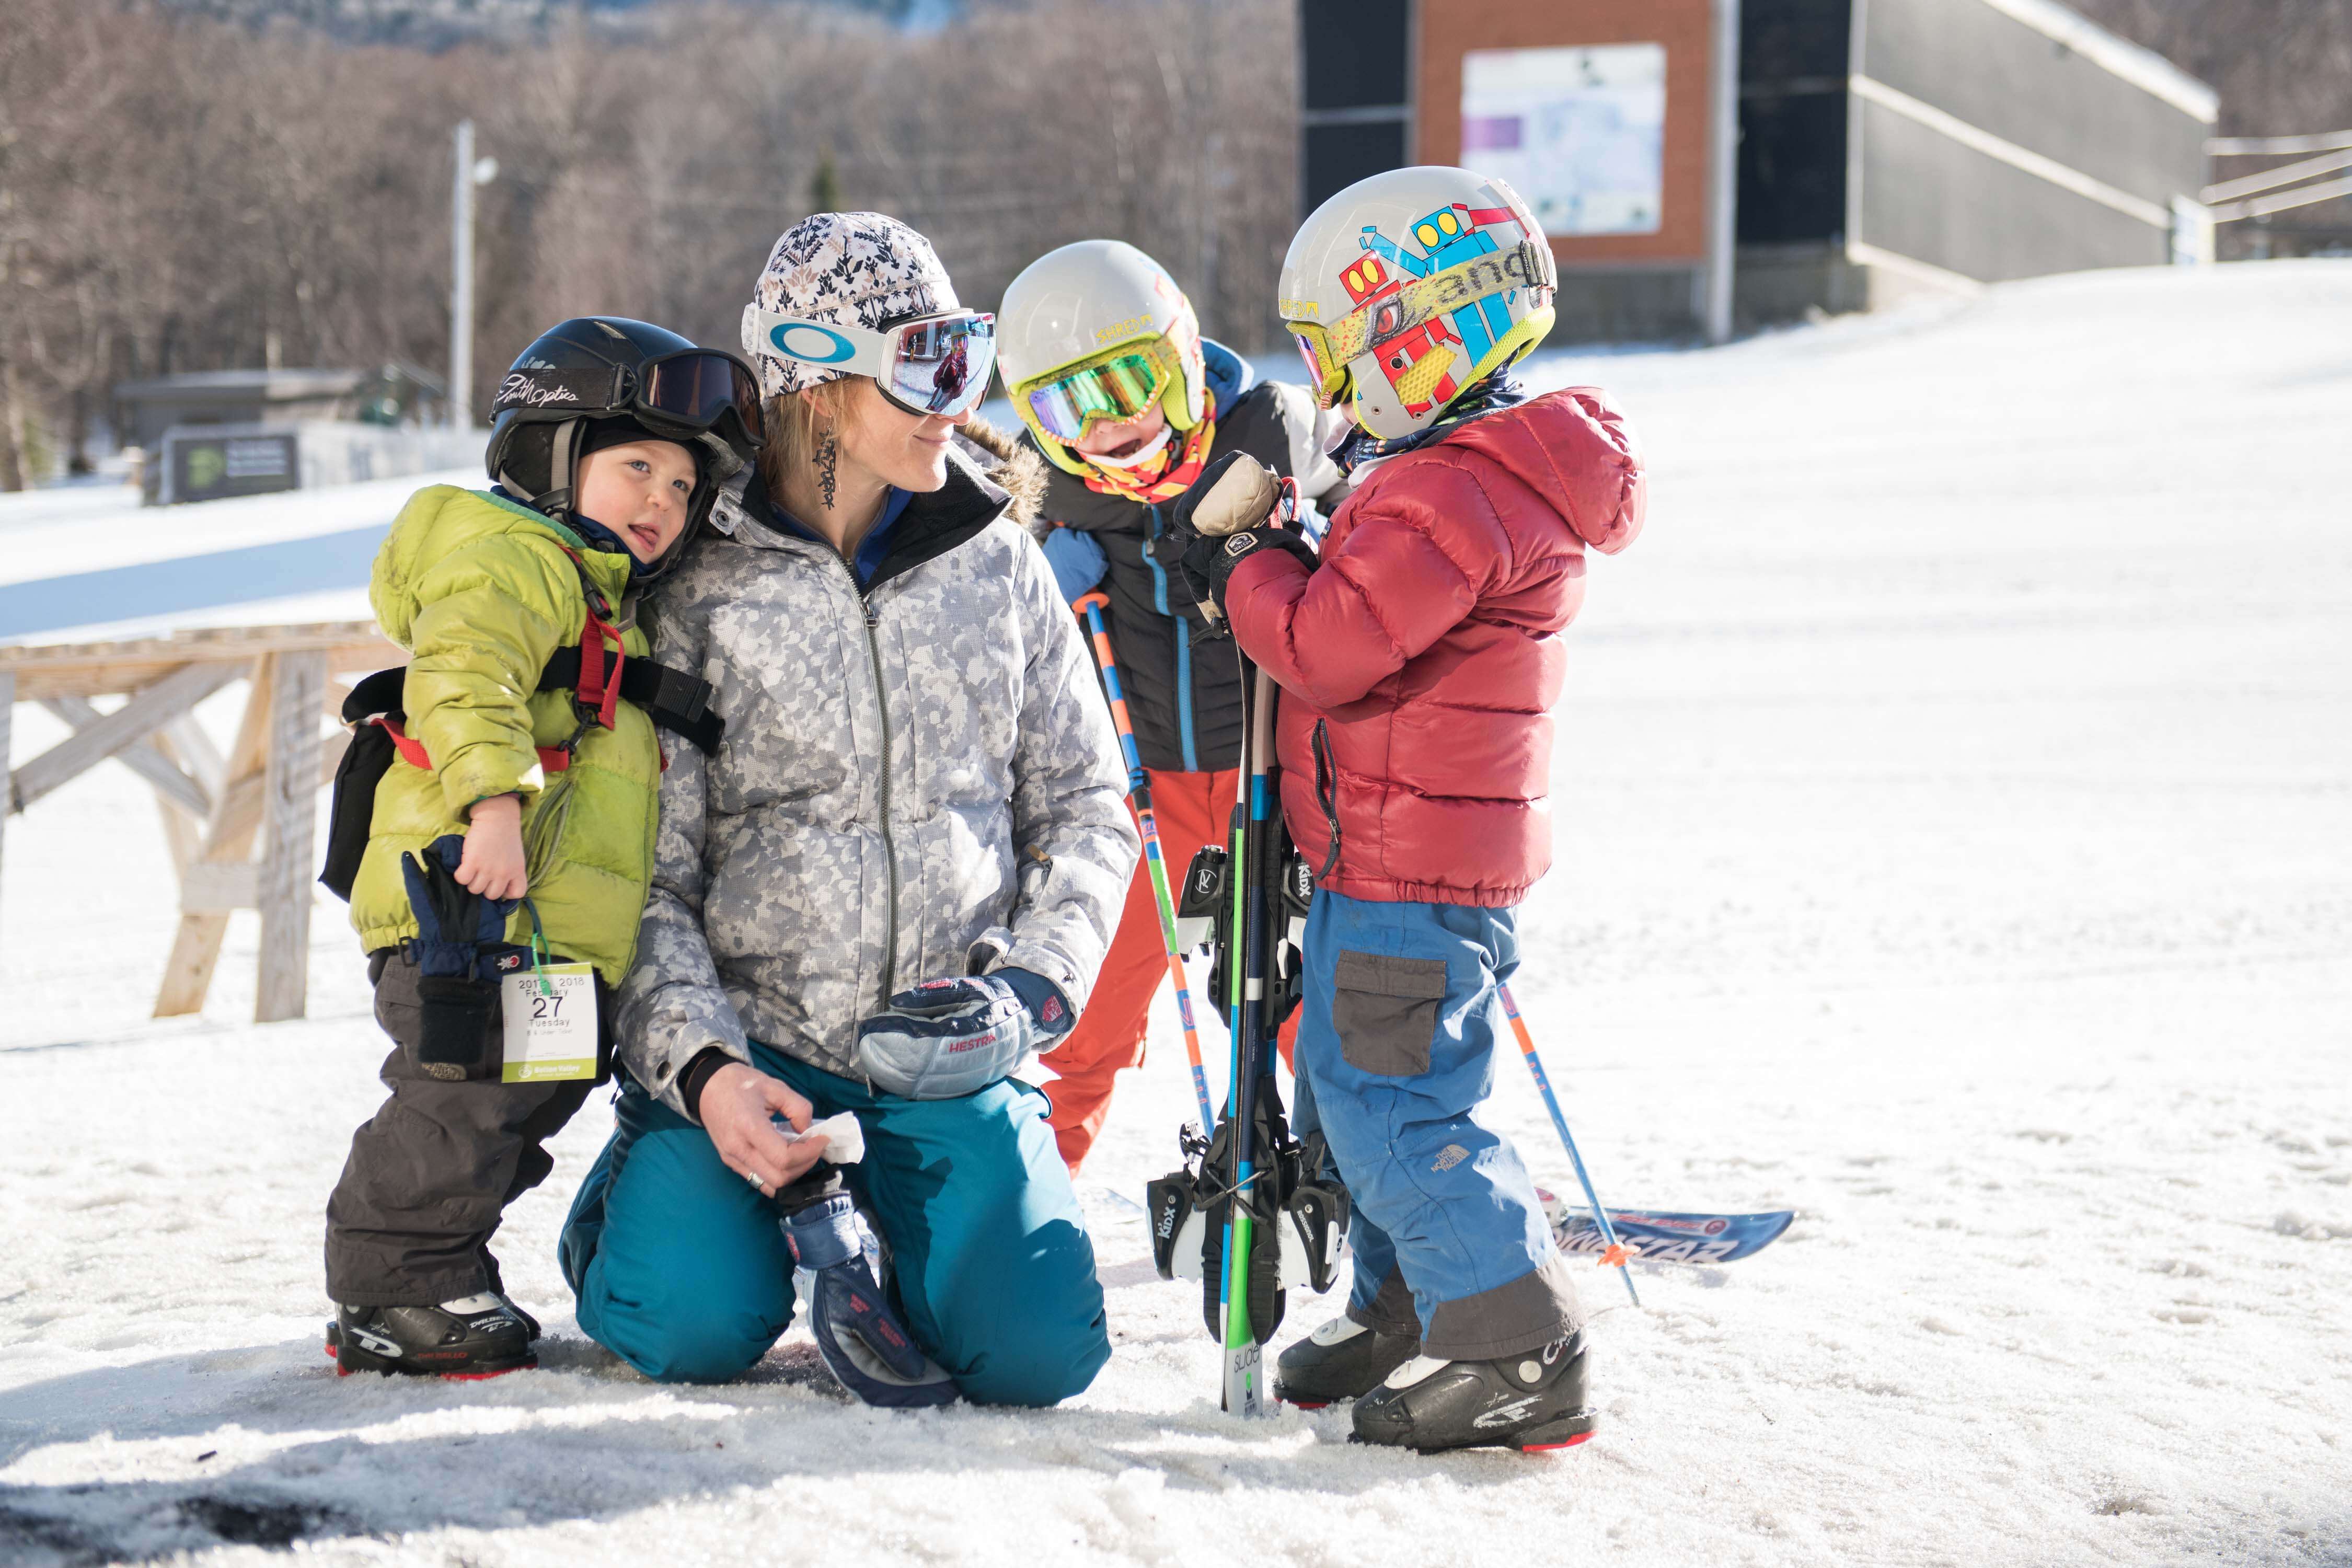 Mother with kids in ski gear